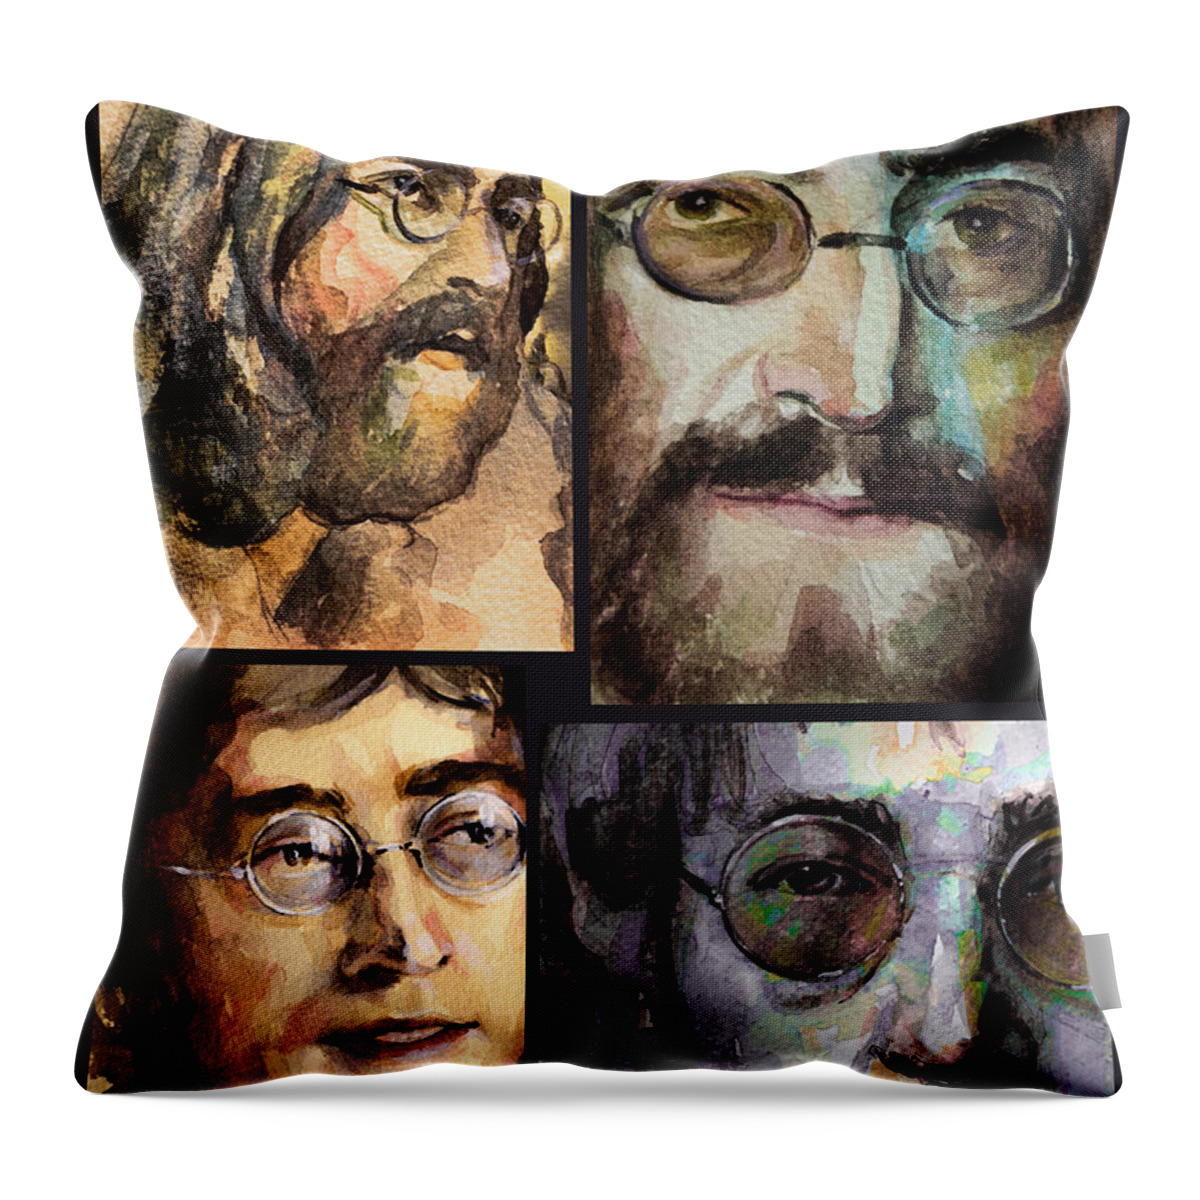 John Lennon Throw Pillow featuring the painting Rock 'n' Roll by Laur Iduc